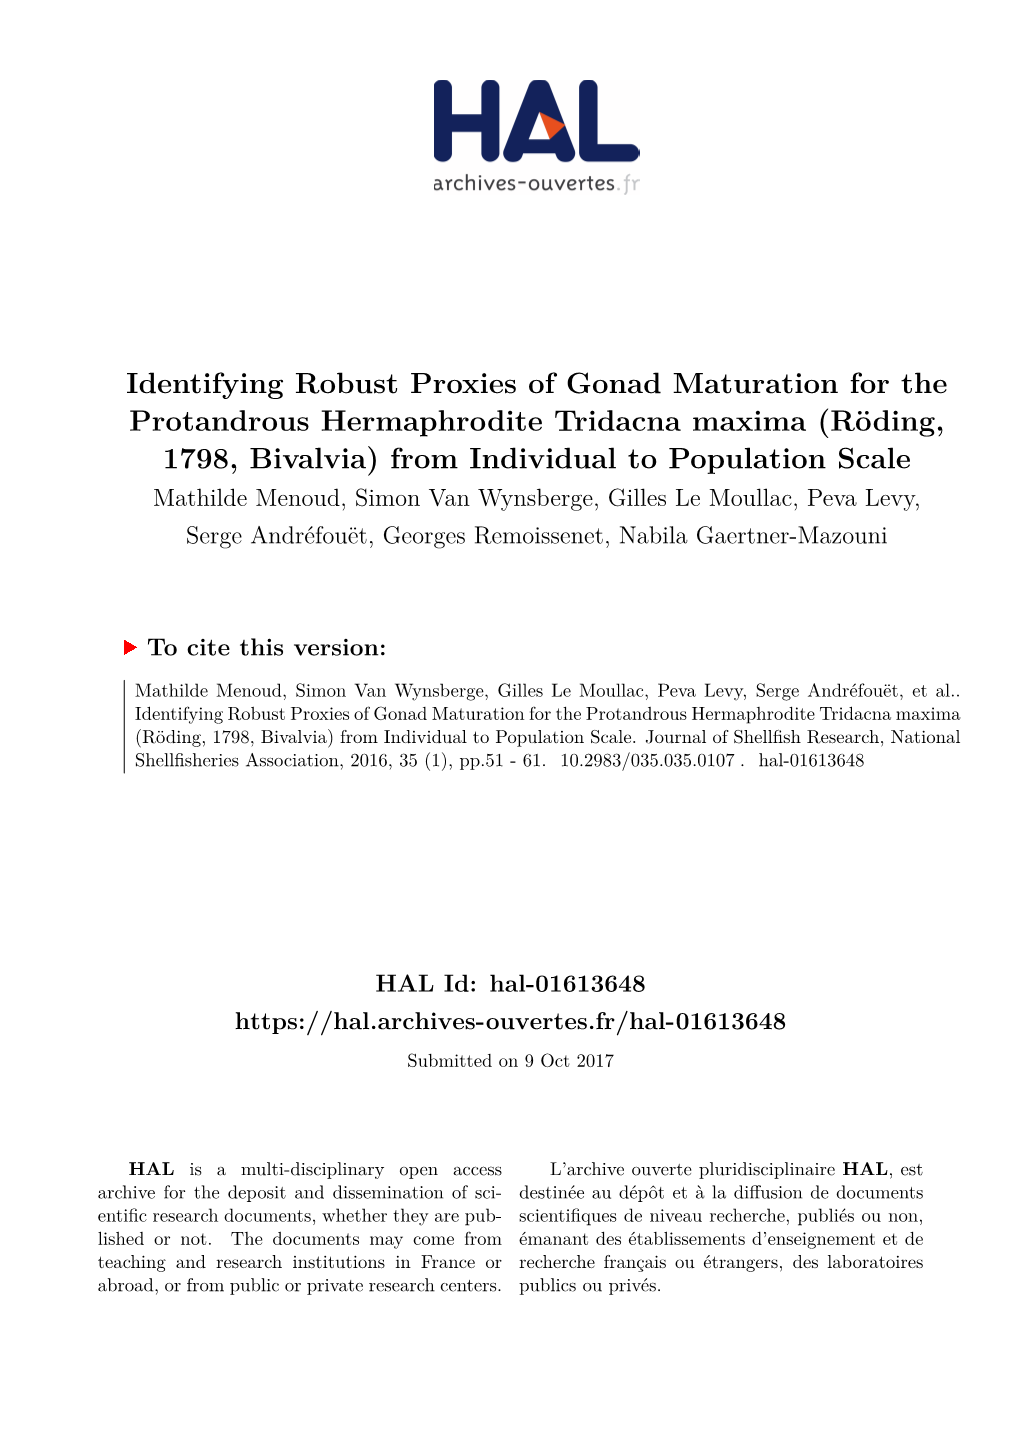 Identifying Robust Proxies of Gonad Maturation for the Protandrous Hermaphrodite Tridacna Maxima (Röding, 1798, Bivalvia) From